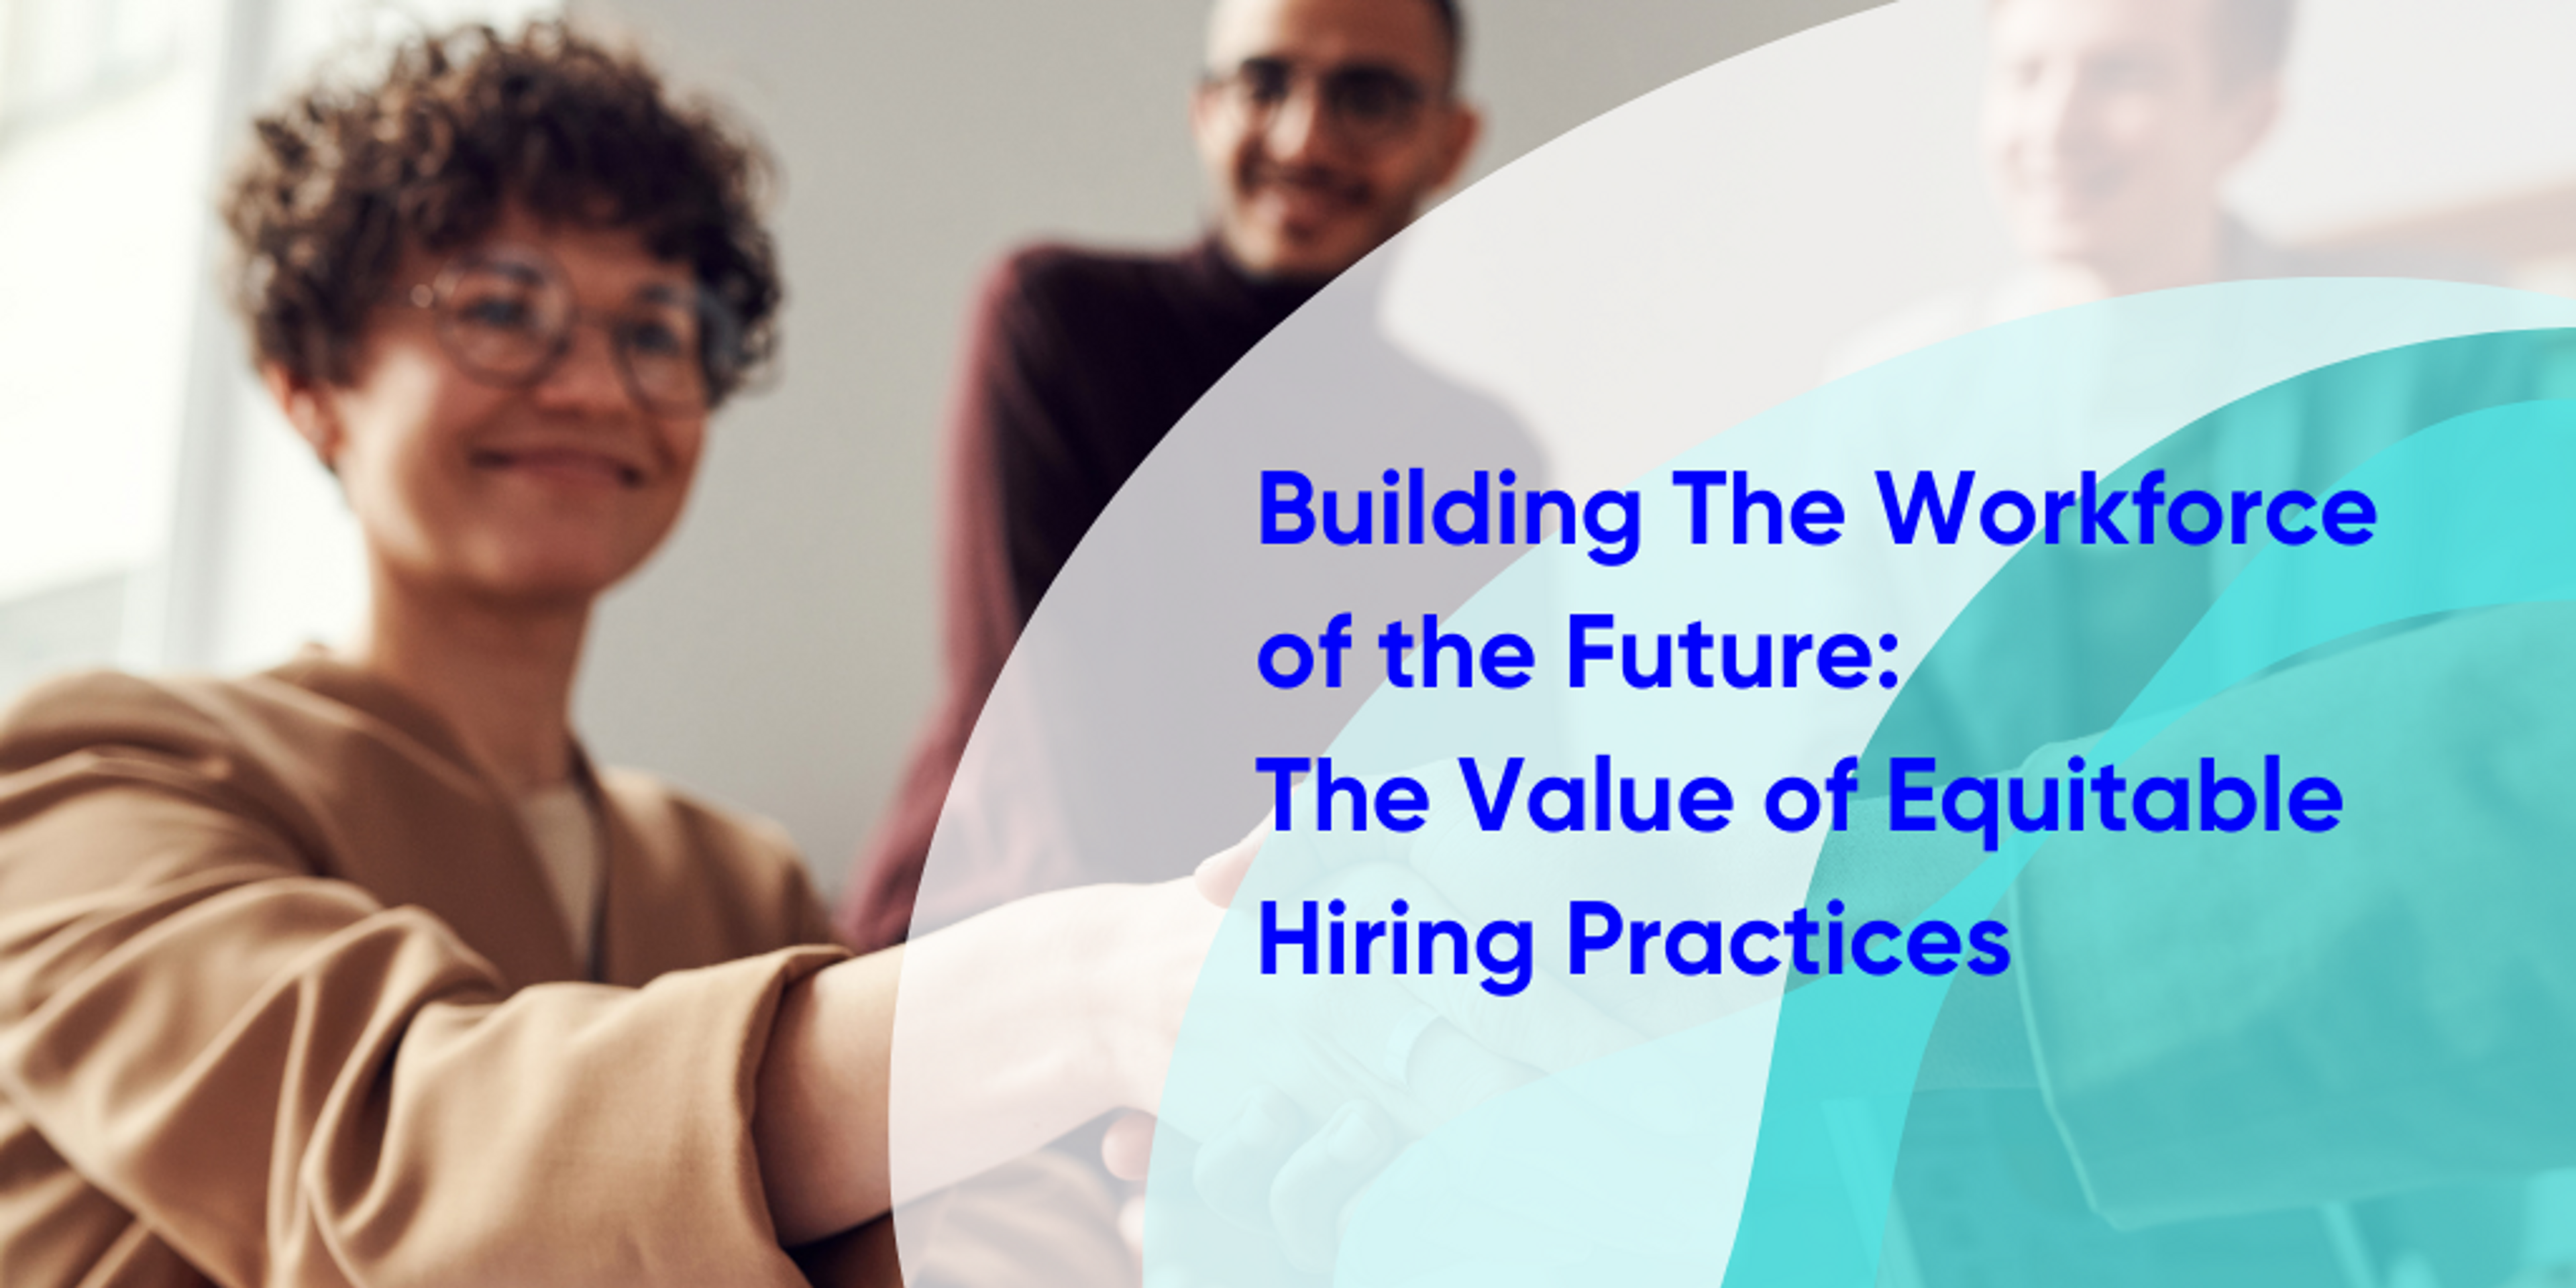 Image of people shaking hands with text that reads "Building The Workforce of the Future: The Value of Equitable Hiring Practices"